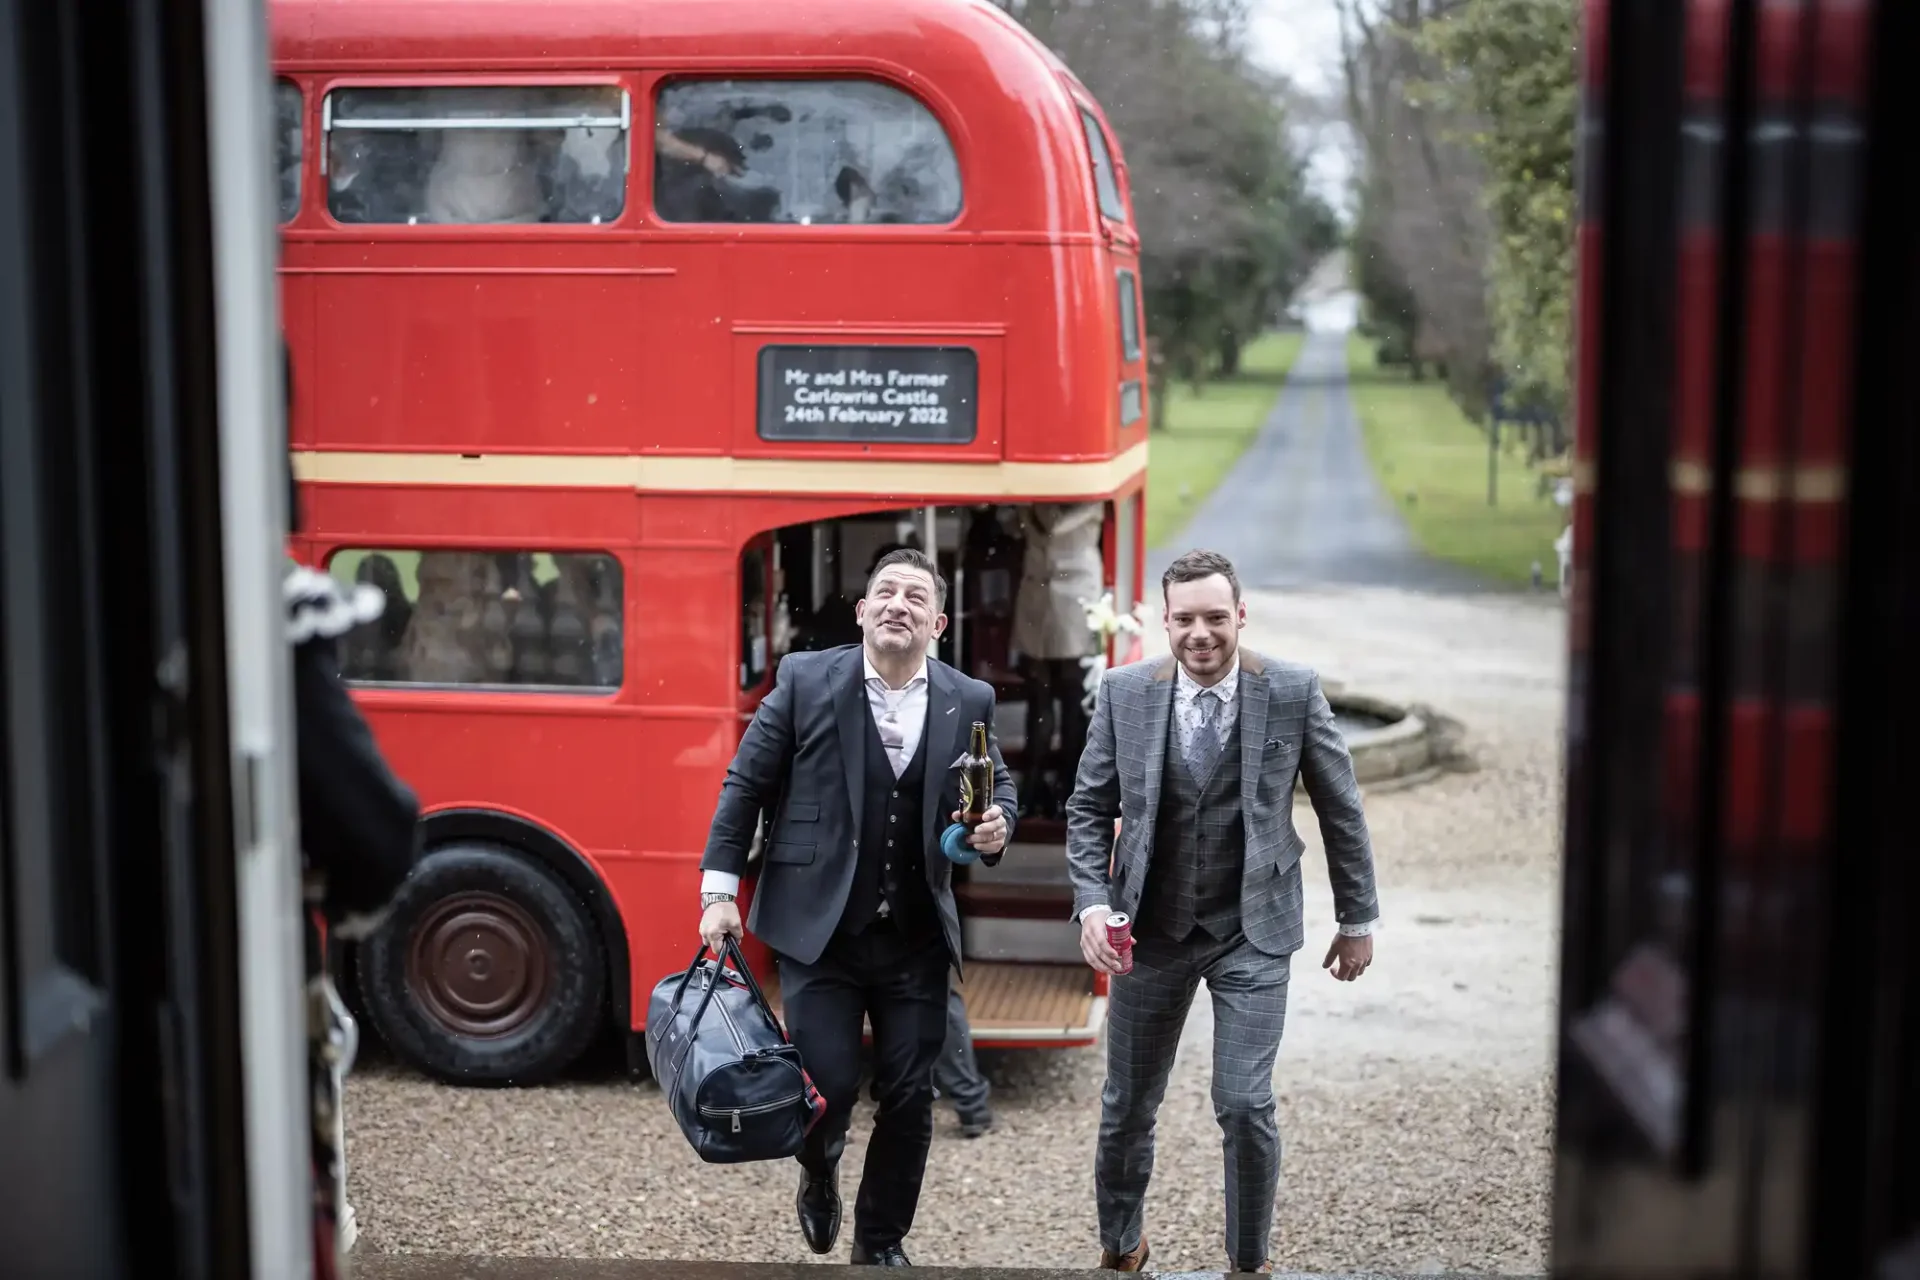 Two men in suits joyfully running with champagne and a bag toward a red double-decker bus parked on a gravel path, viewed from inside another vehicle.